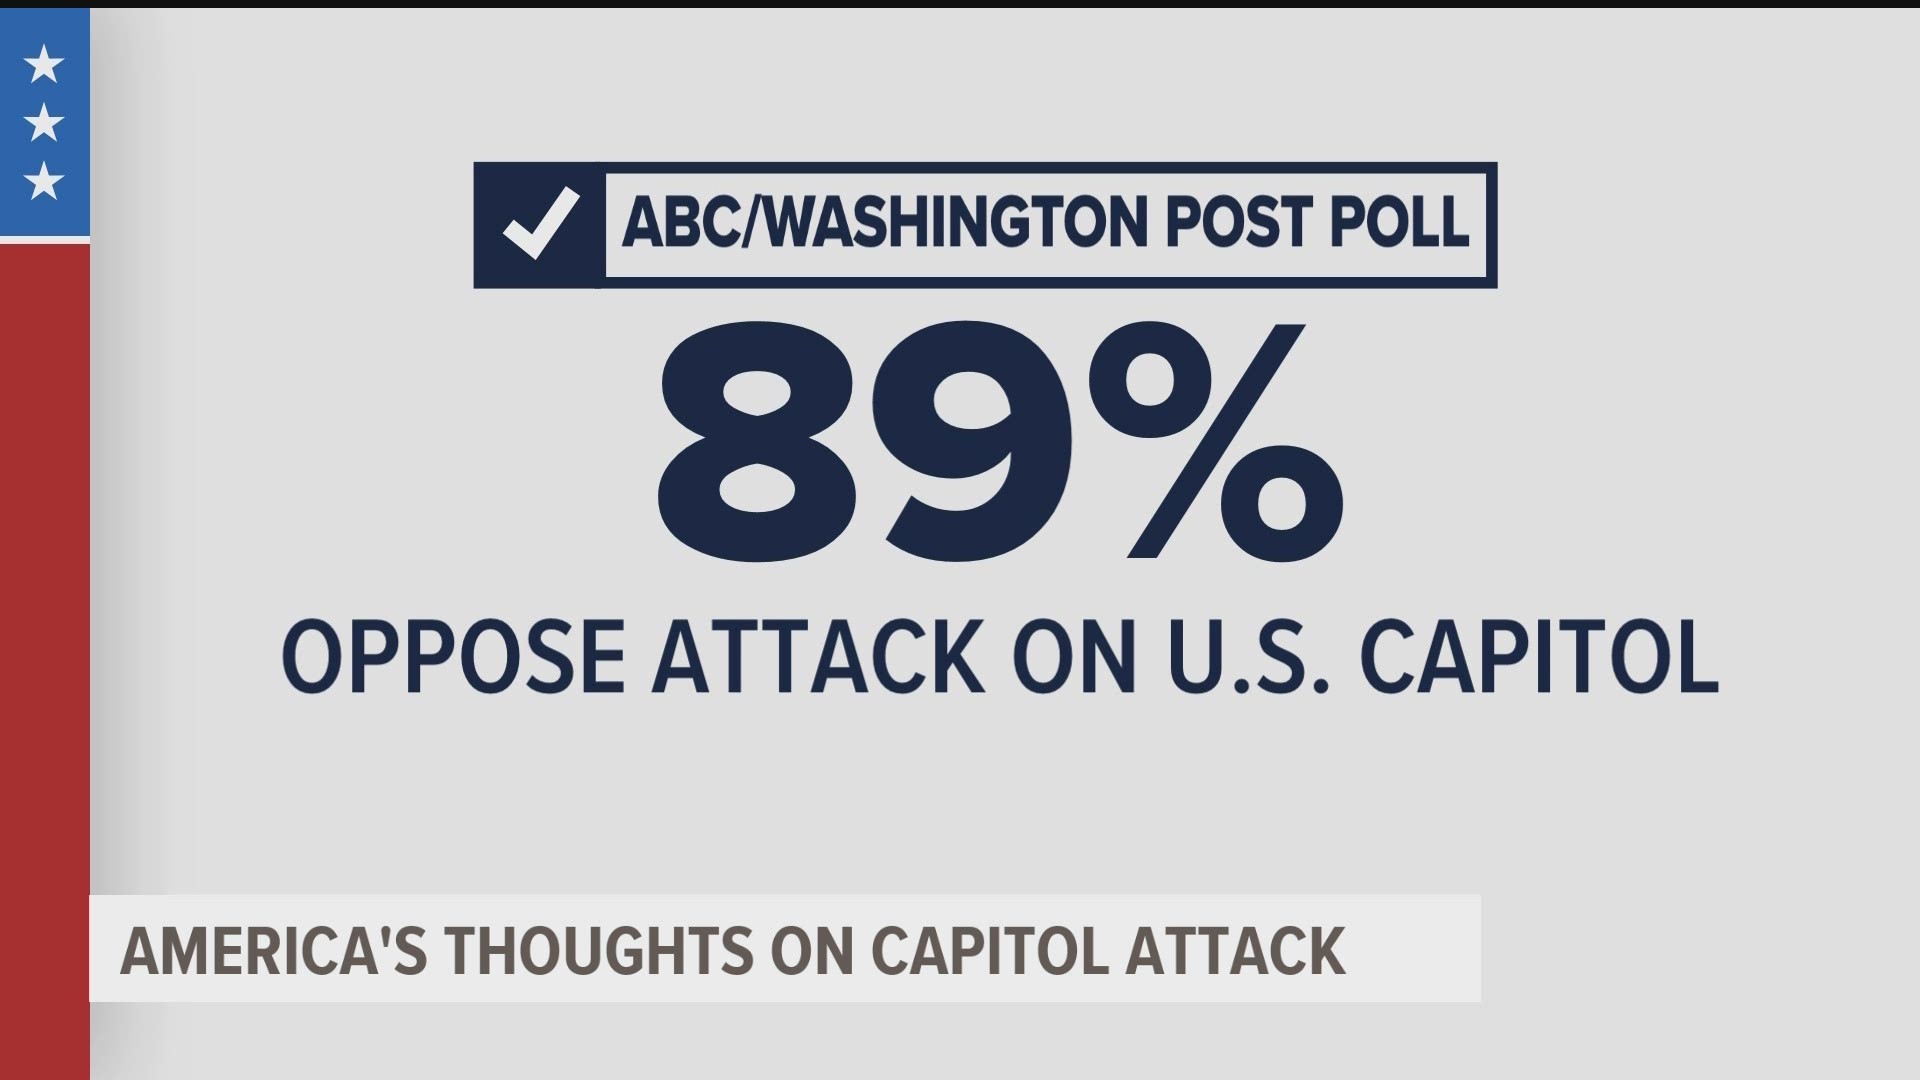 ABC News and The Washington Post released a poll on Friday, detailing how Americans feel about the Jan. 6 insurrection at the U.S. Capitol.